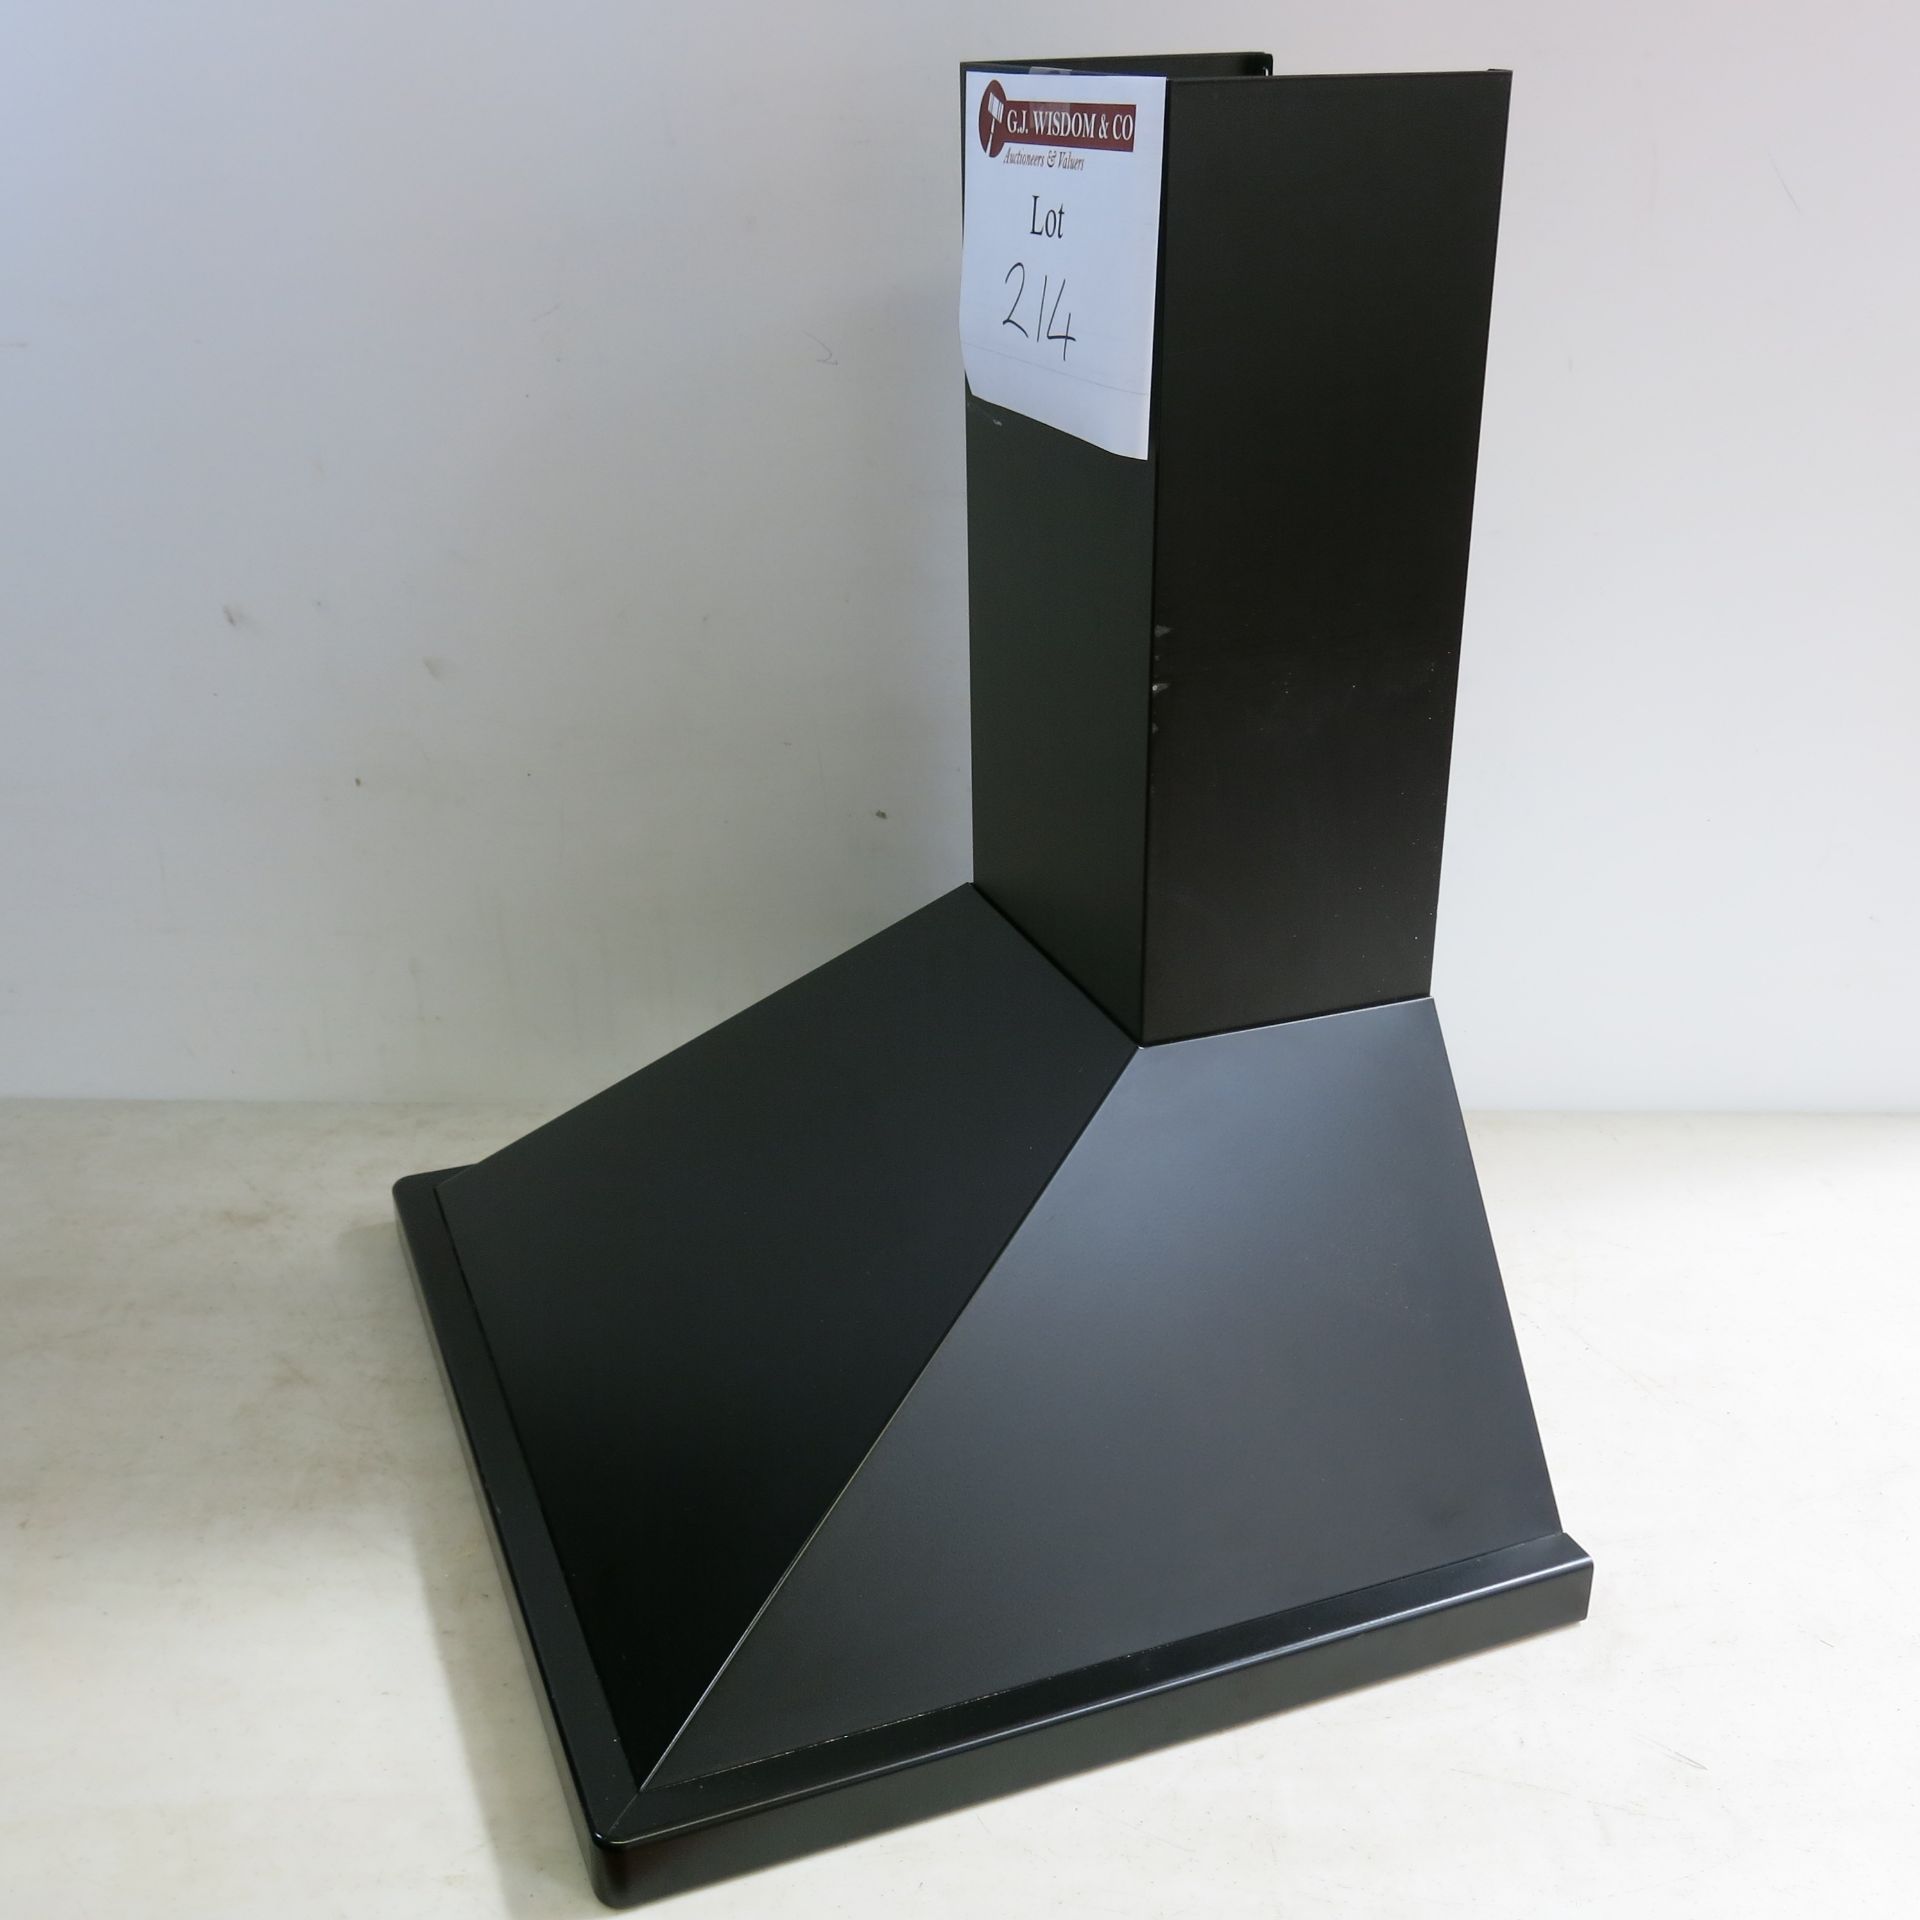 Baumatic 60cm Black Extractor Cooker Hood, Model FCC/2002. Damage to Filters, Ex Display/As Viewed. - Image 2 of 5